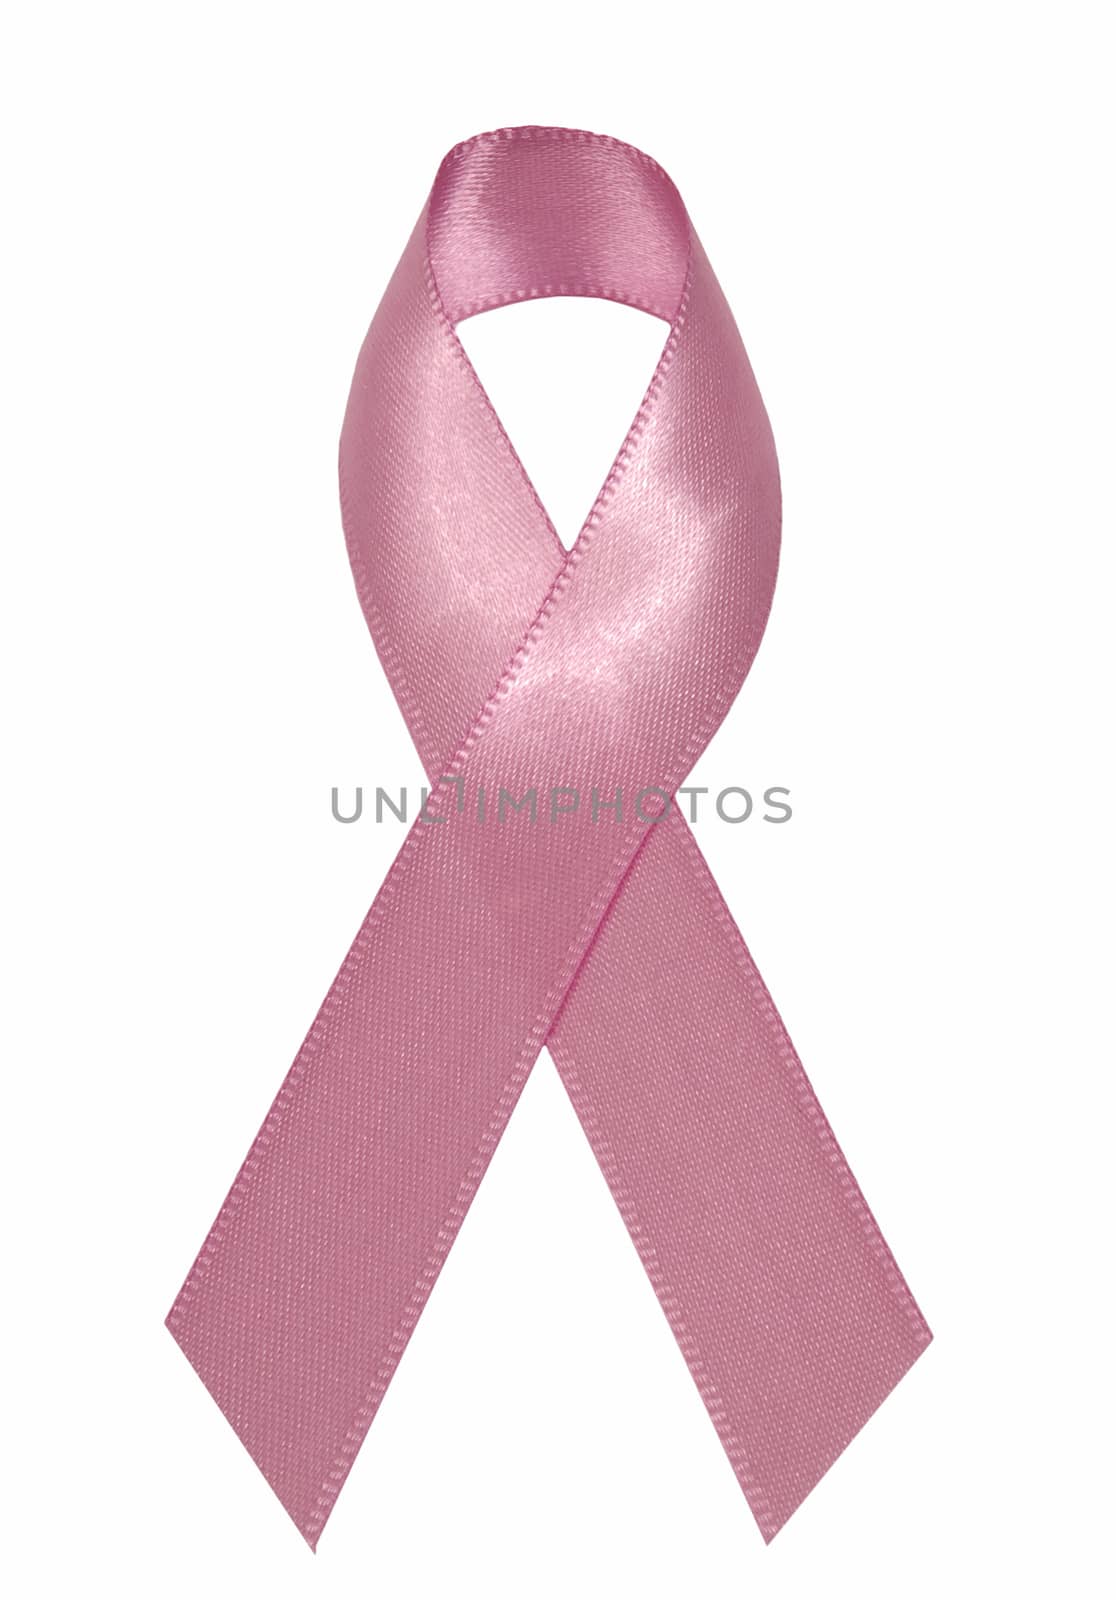 Breast Cancer Awareness Ribbon On White by stockbuster1